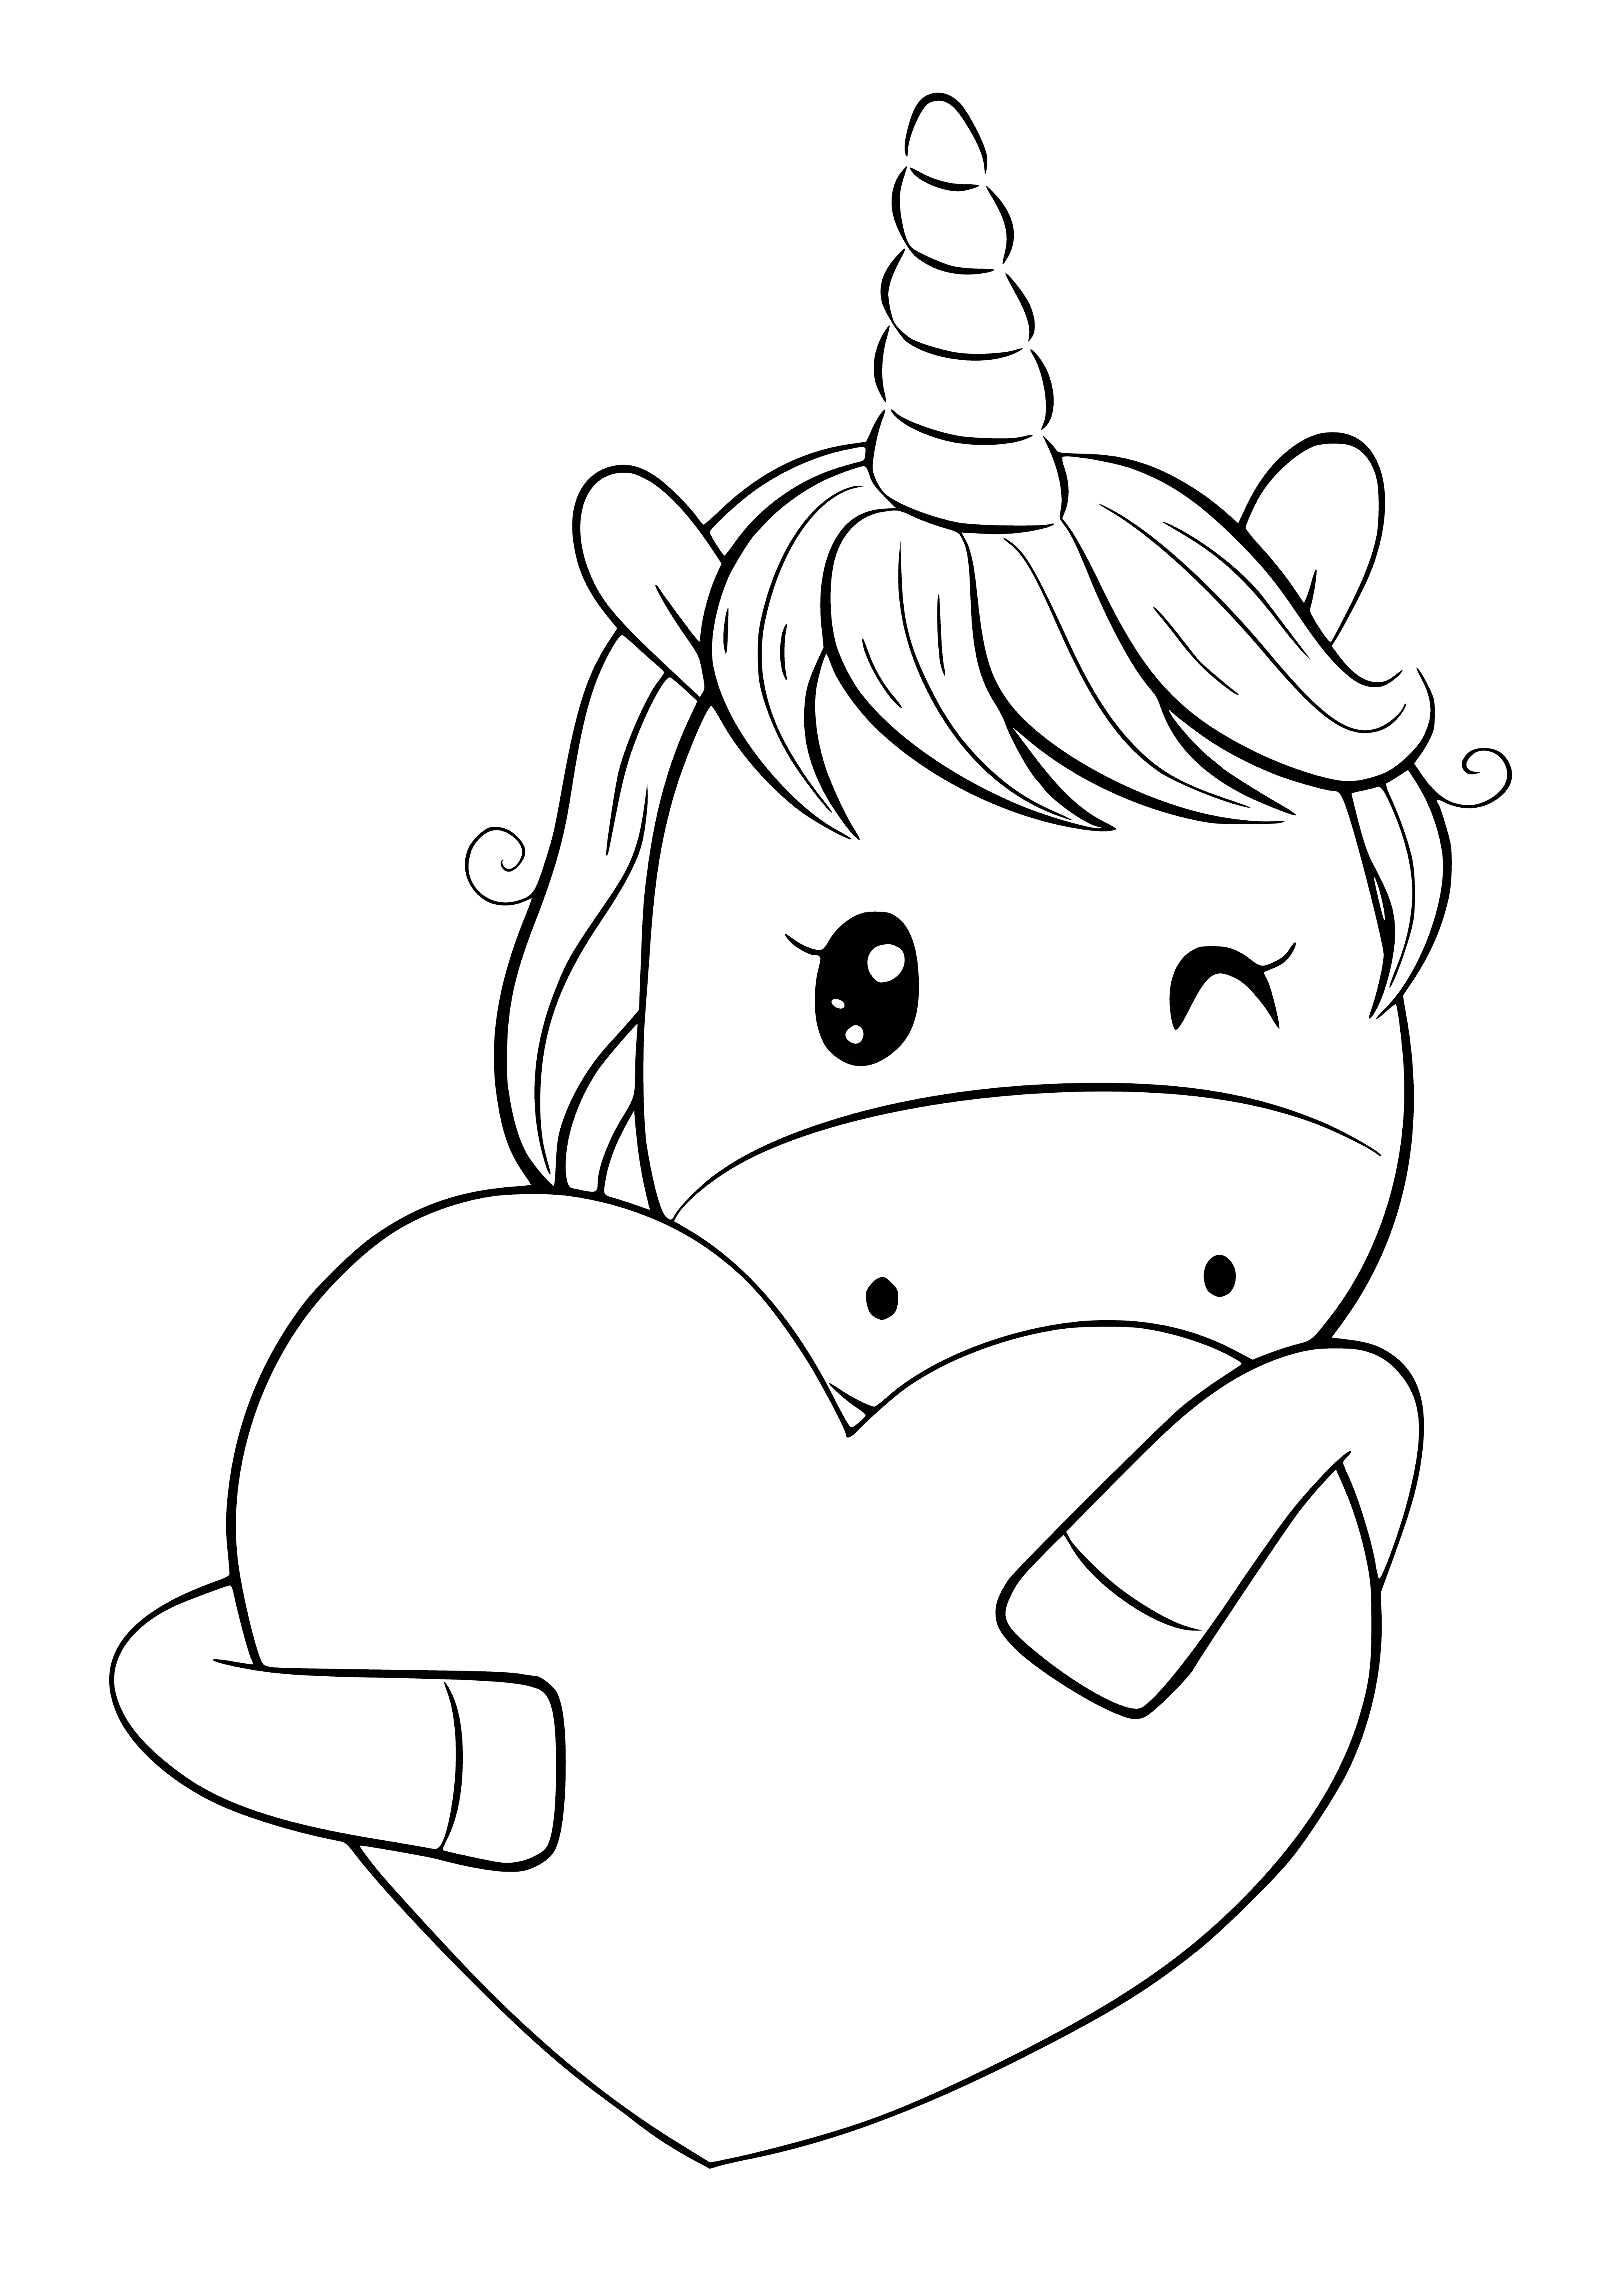 coloring page: A pastel unicorn with rainbow mane/tail, heart-shaped Cutie Mark, standing on a cloud.